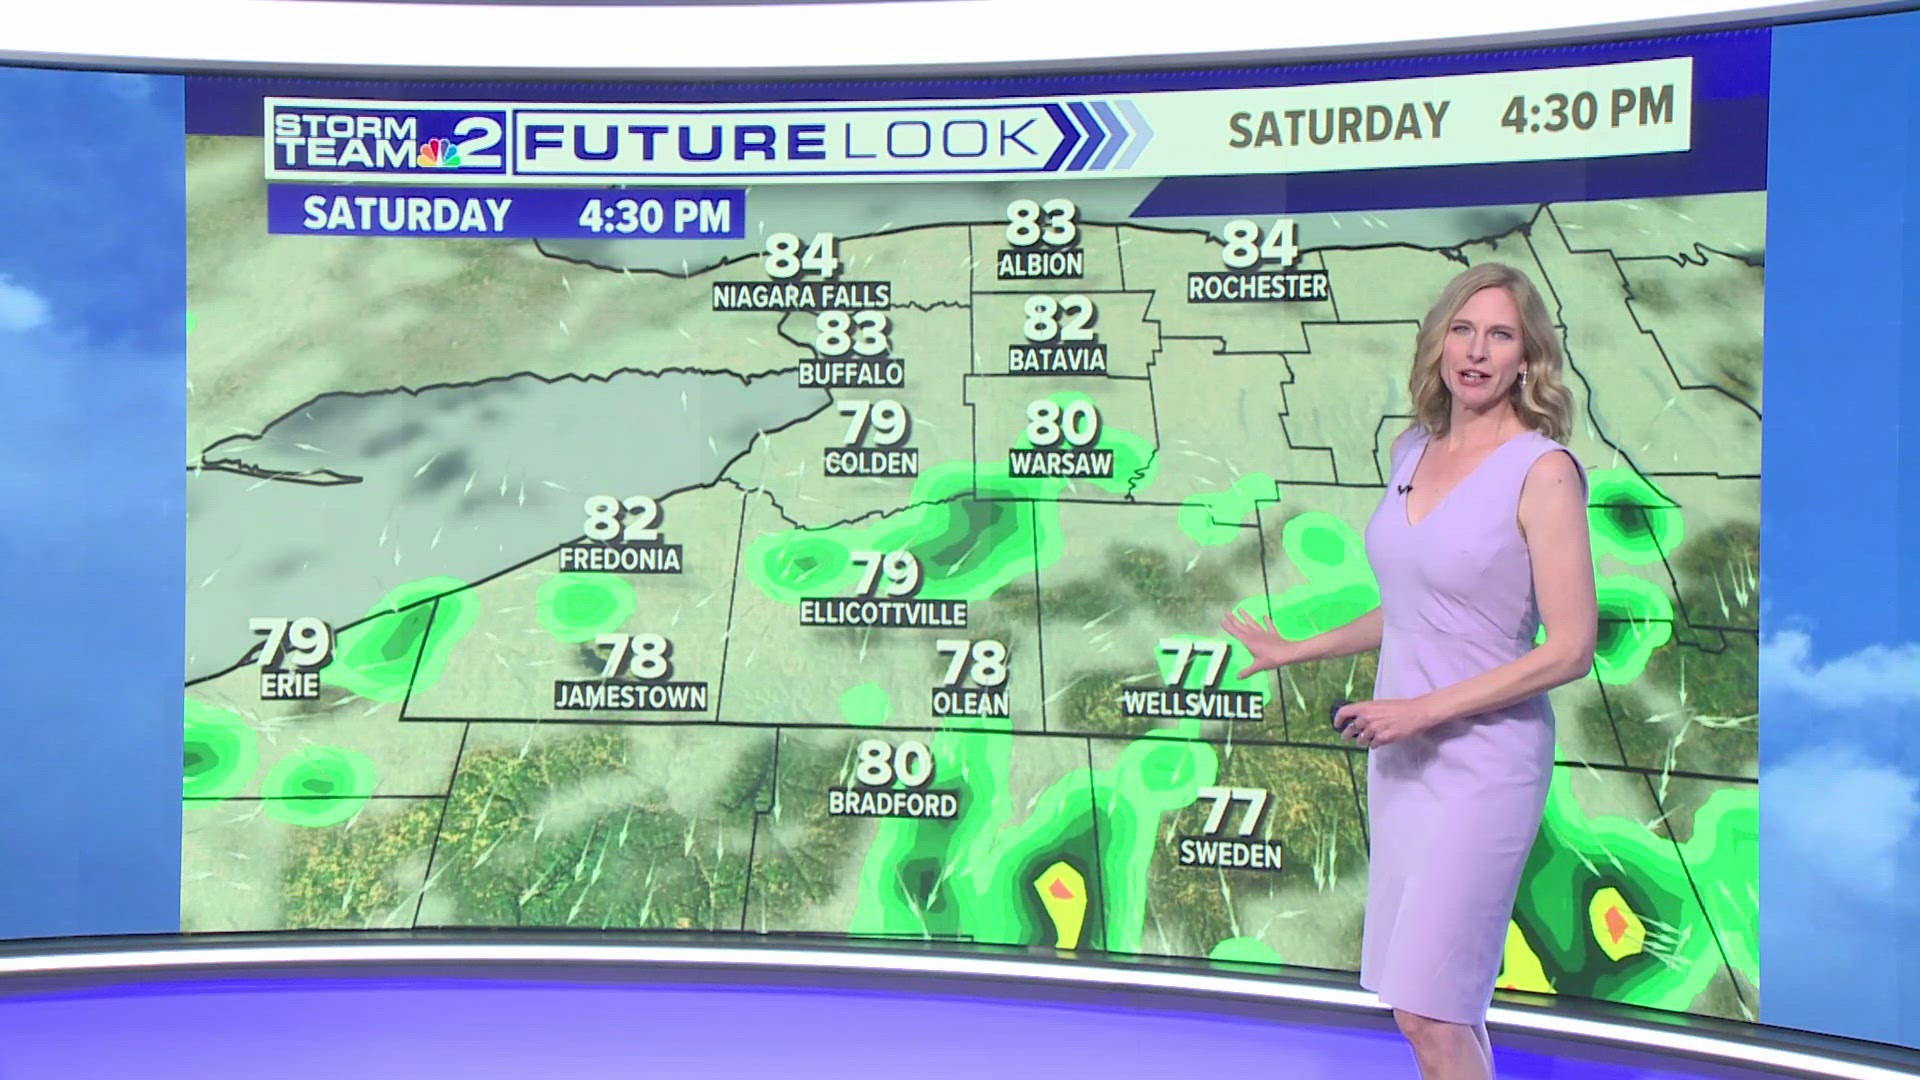 Storm Team 2 evening forecast with Jen Stanonis for Friday, August 2.